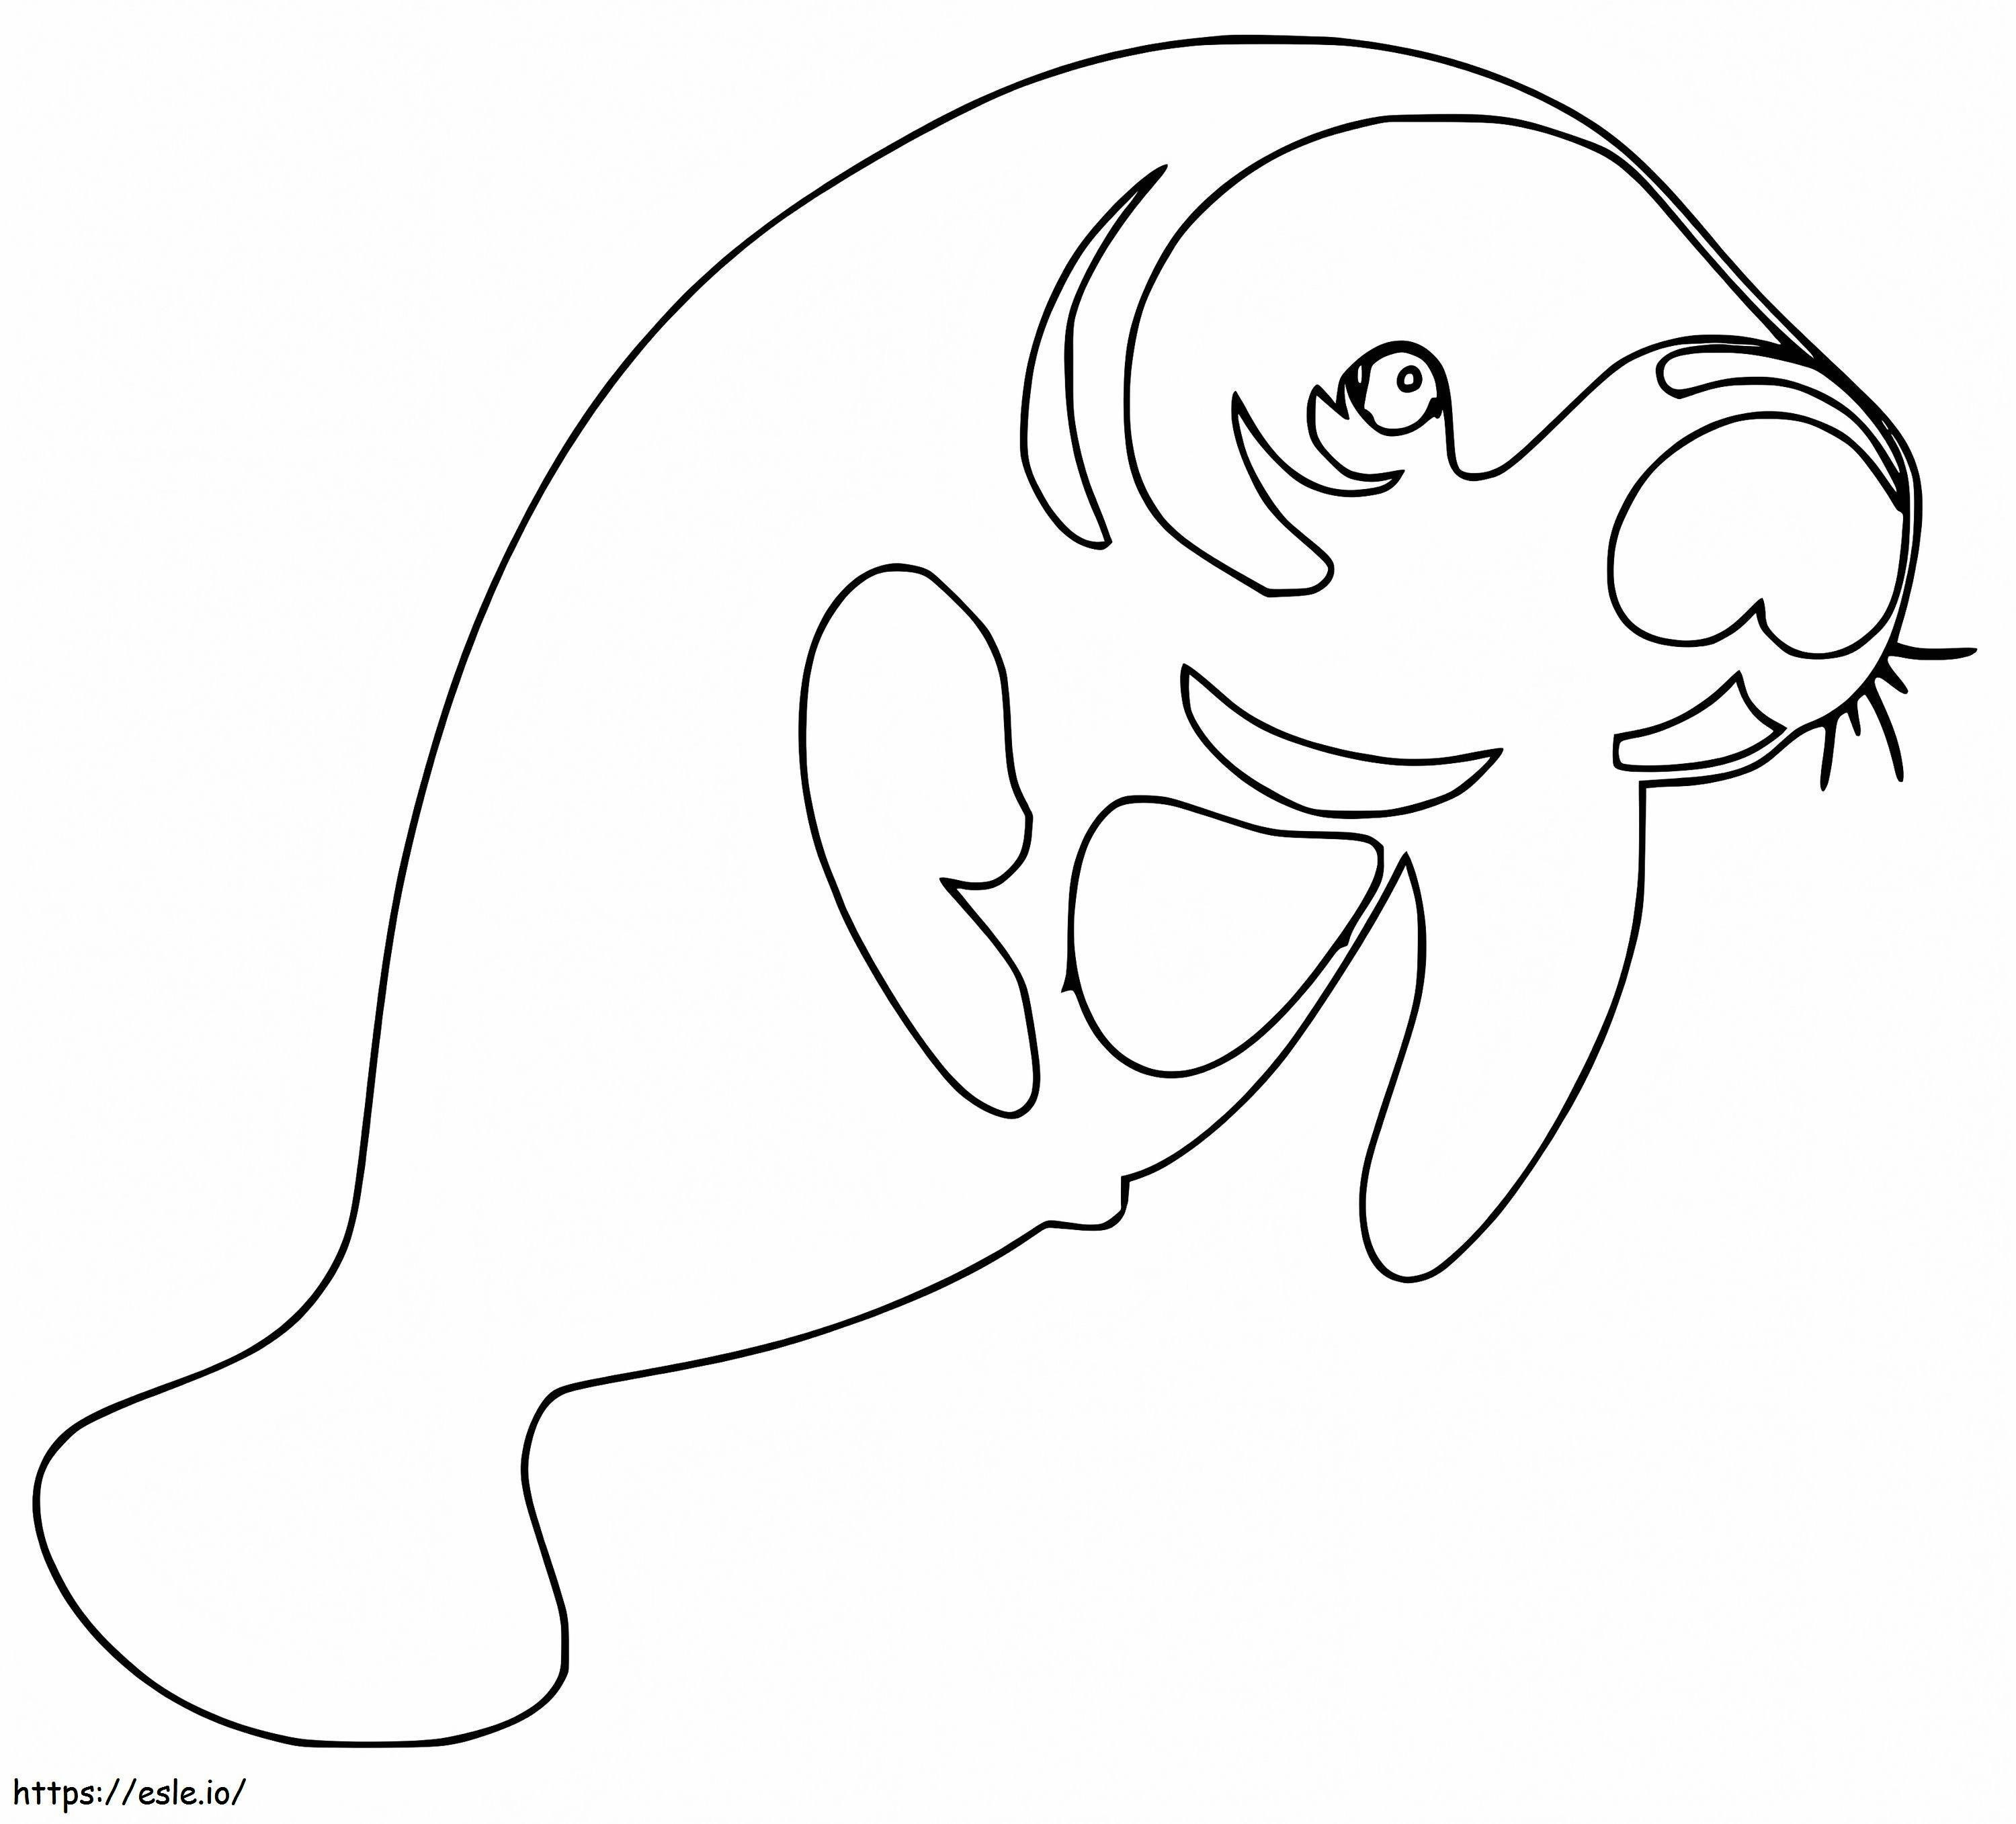 Manatee 3 coloring page